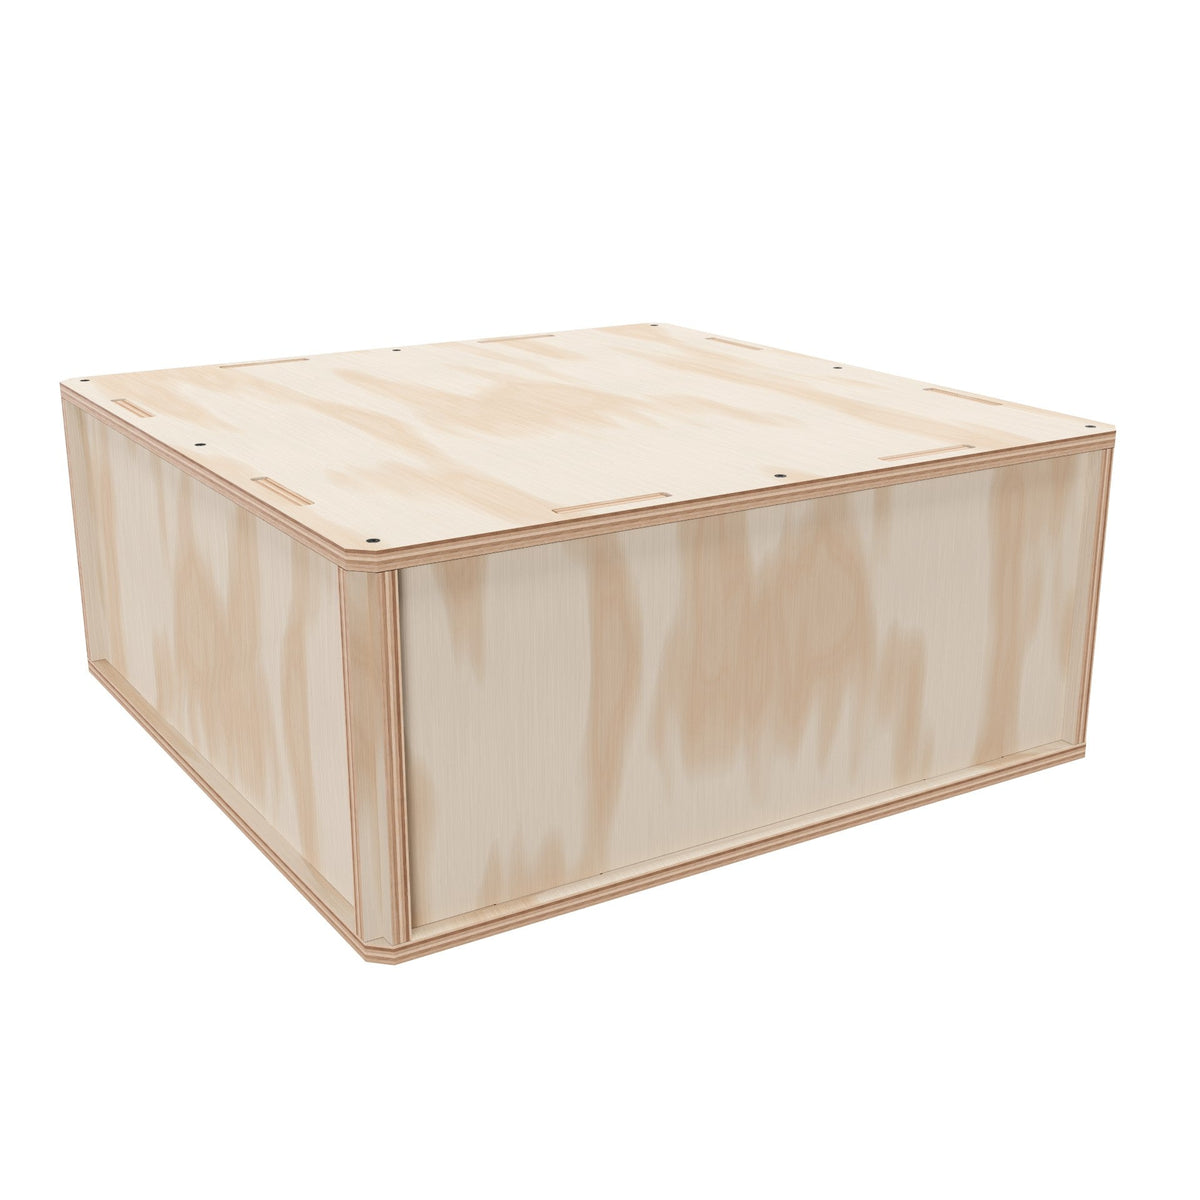 Plywood Shipping Crate 24x24x10